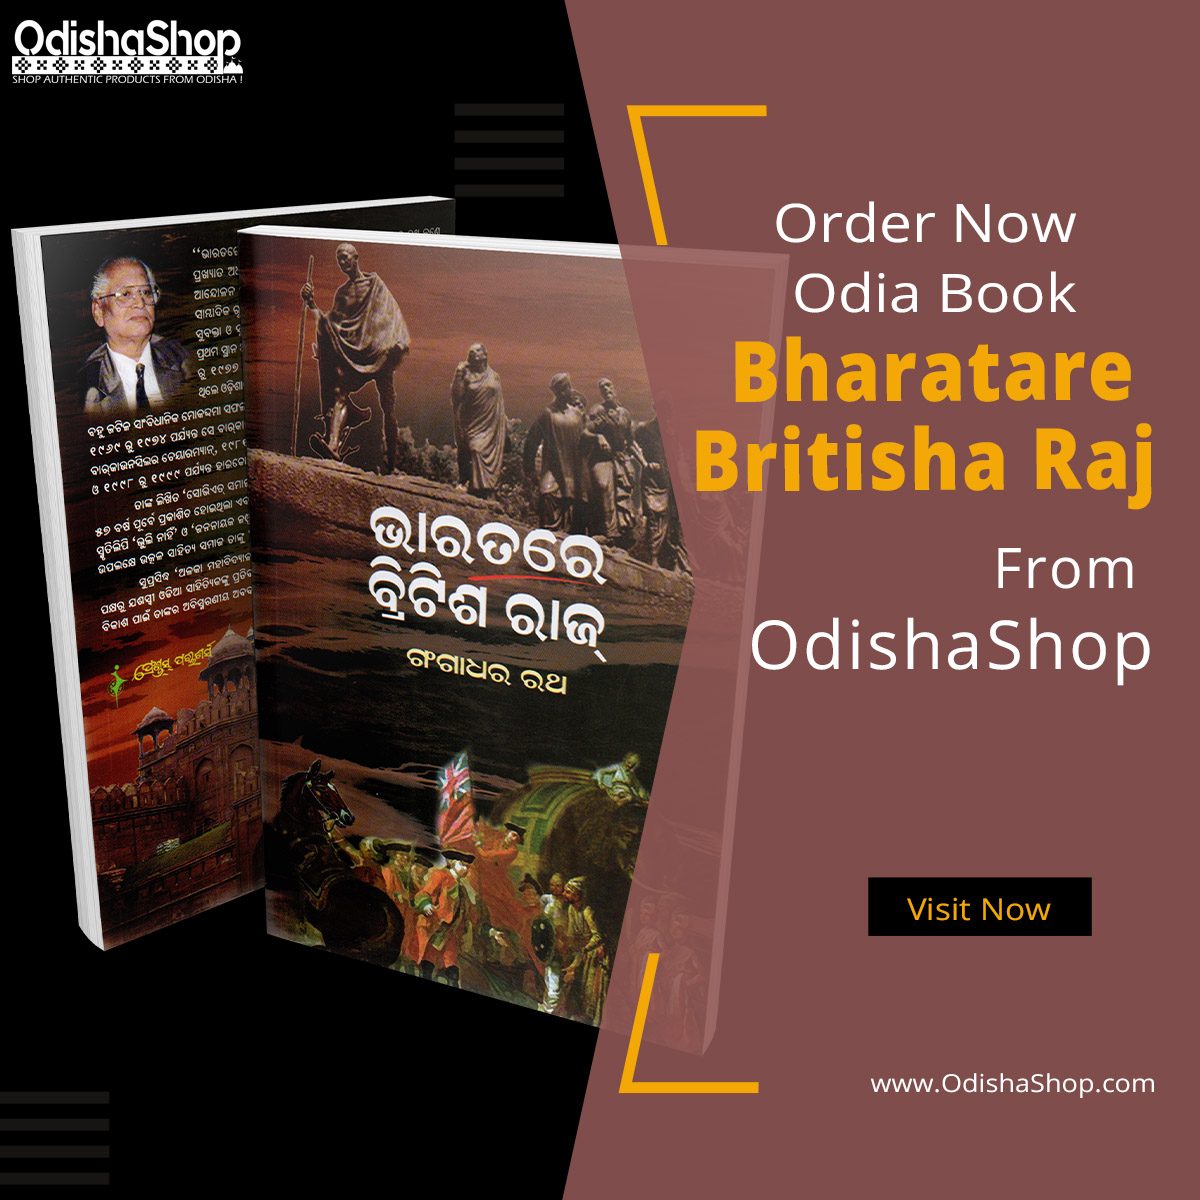 Bharatare British Raj, shedding light on Odisha's history during British  colonization. From the forgotten heroes to the impact on tribal  communities, this book #OdiaBooks #BritishRaj #HistoryLessons
#OdiaBook #BharatareBritishRaj #GangadharRath
odishashop.com/product/odia-b…